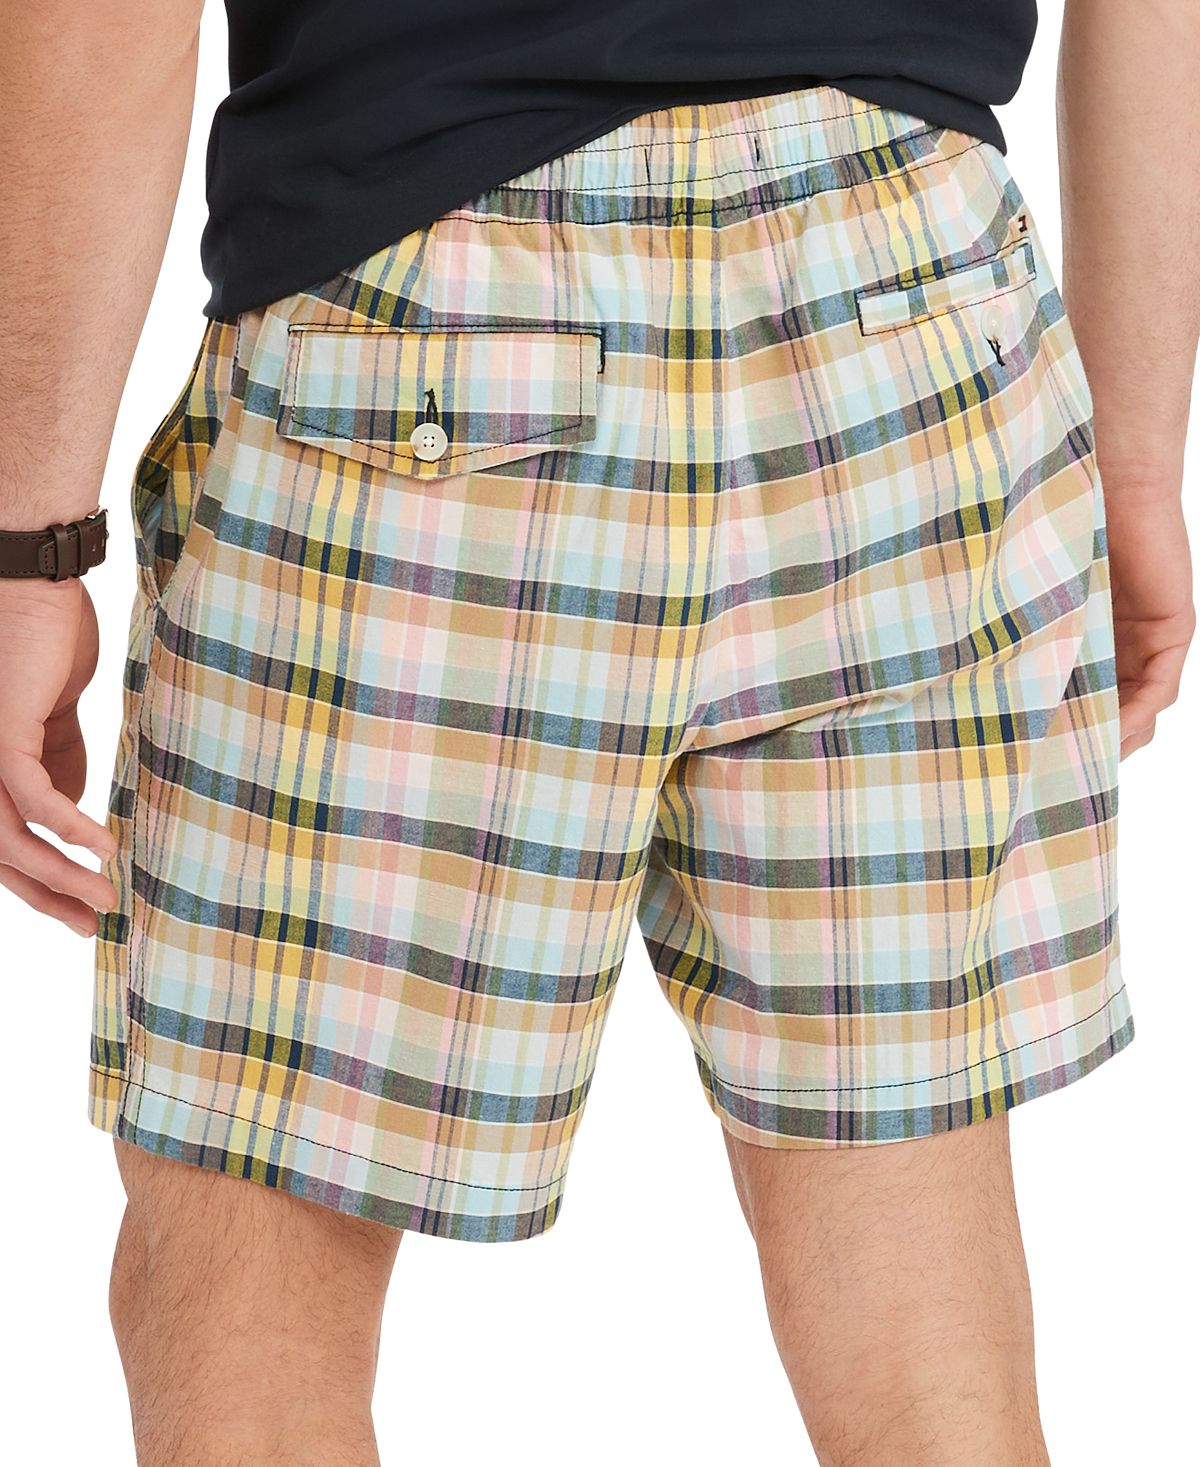 Tommy Hilfiger Men's Th Flex Plaid Theo 7 Stretch Waistband Shorts Pink Size Large